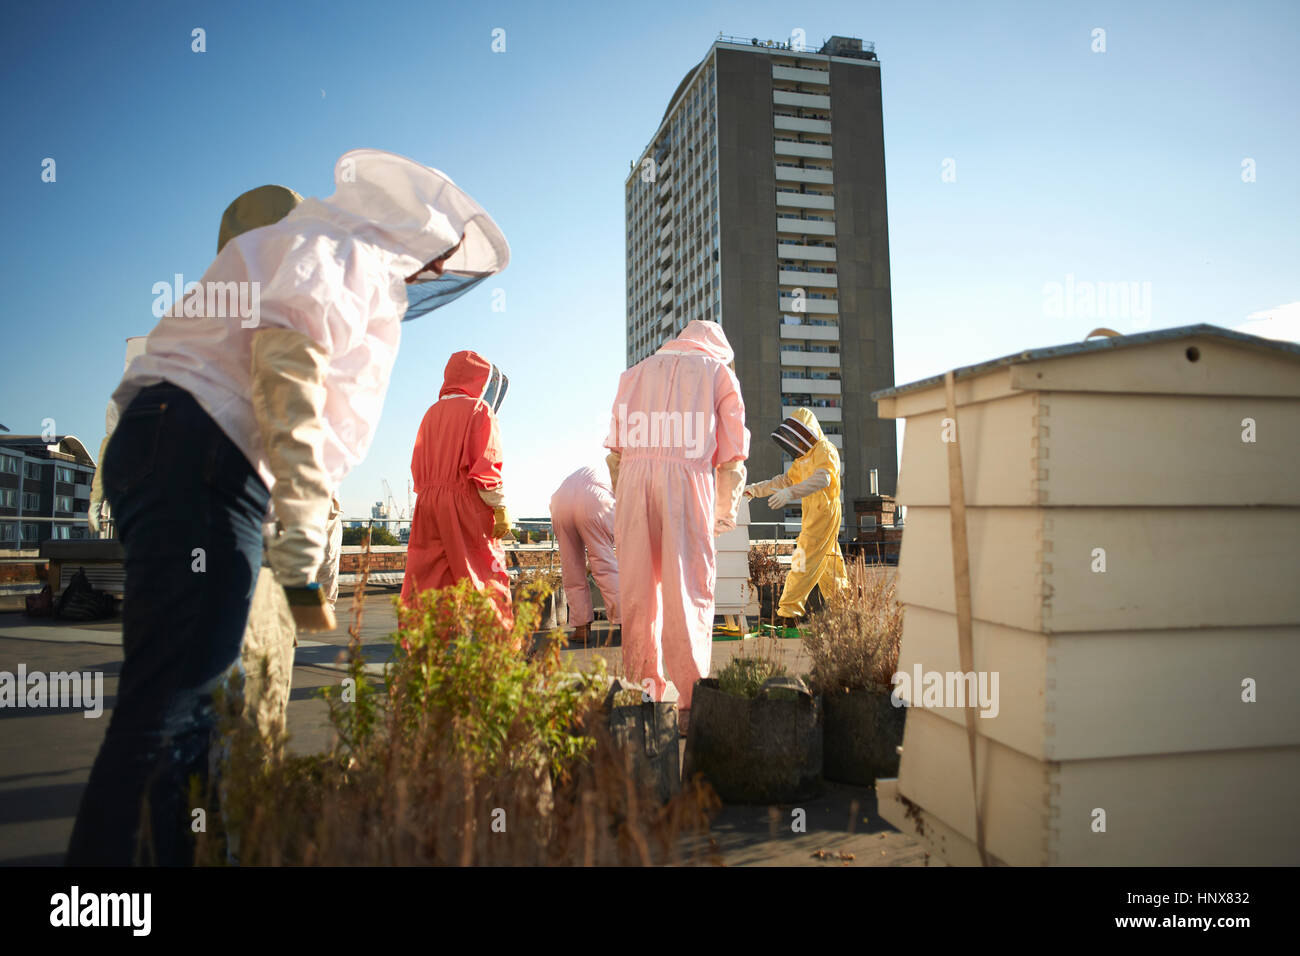 Les apiculteurs tendant aviary on city rooftop Banque D'Images